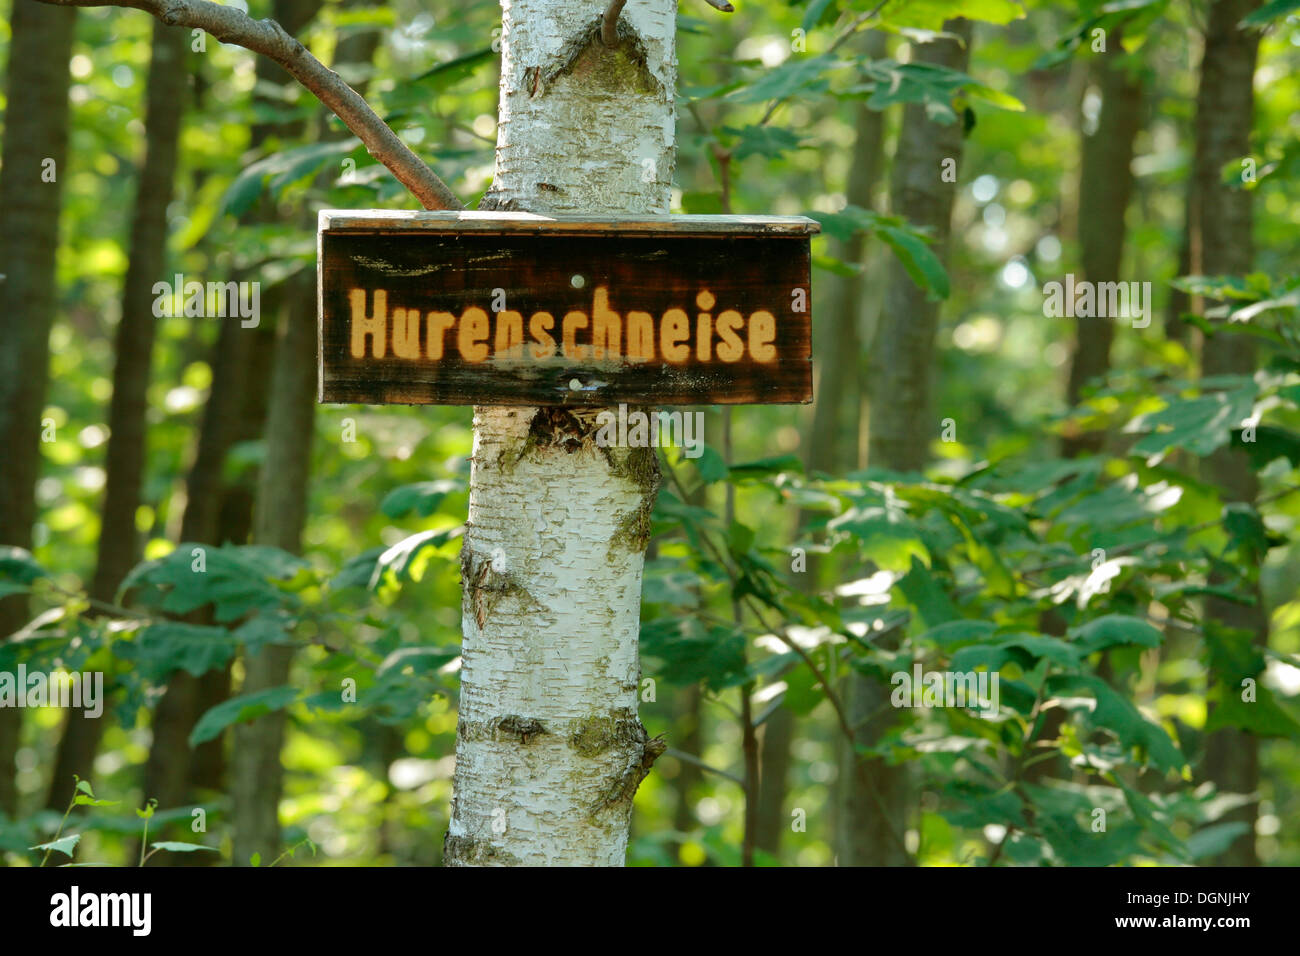 Official street sign Hurenschneise, German for whore's path in the woods near Zeppelinheim, Neu-Isenburg, Offenbach district Stock Photo